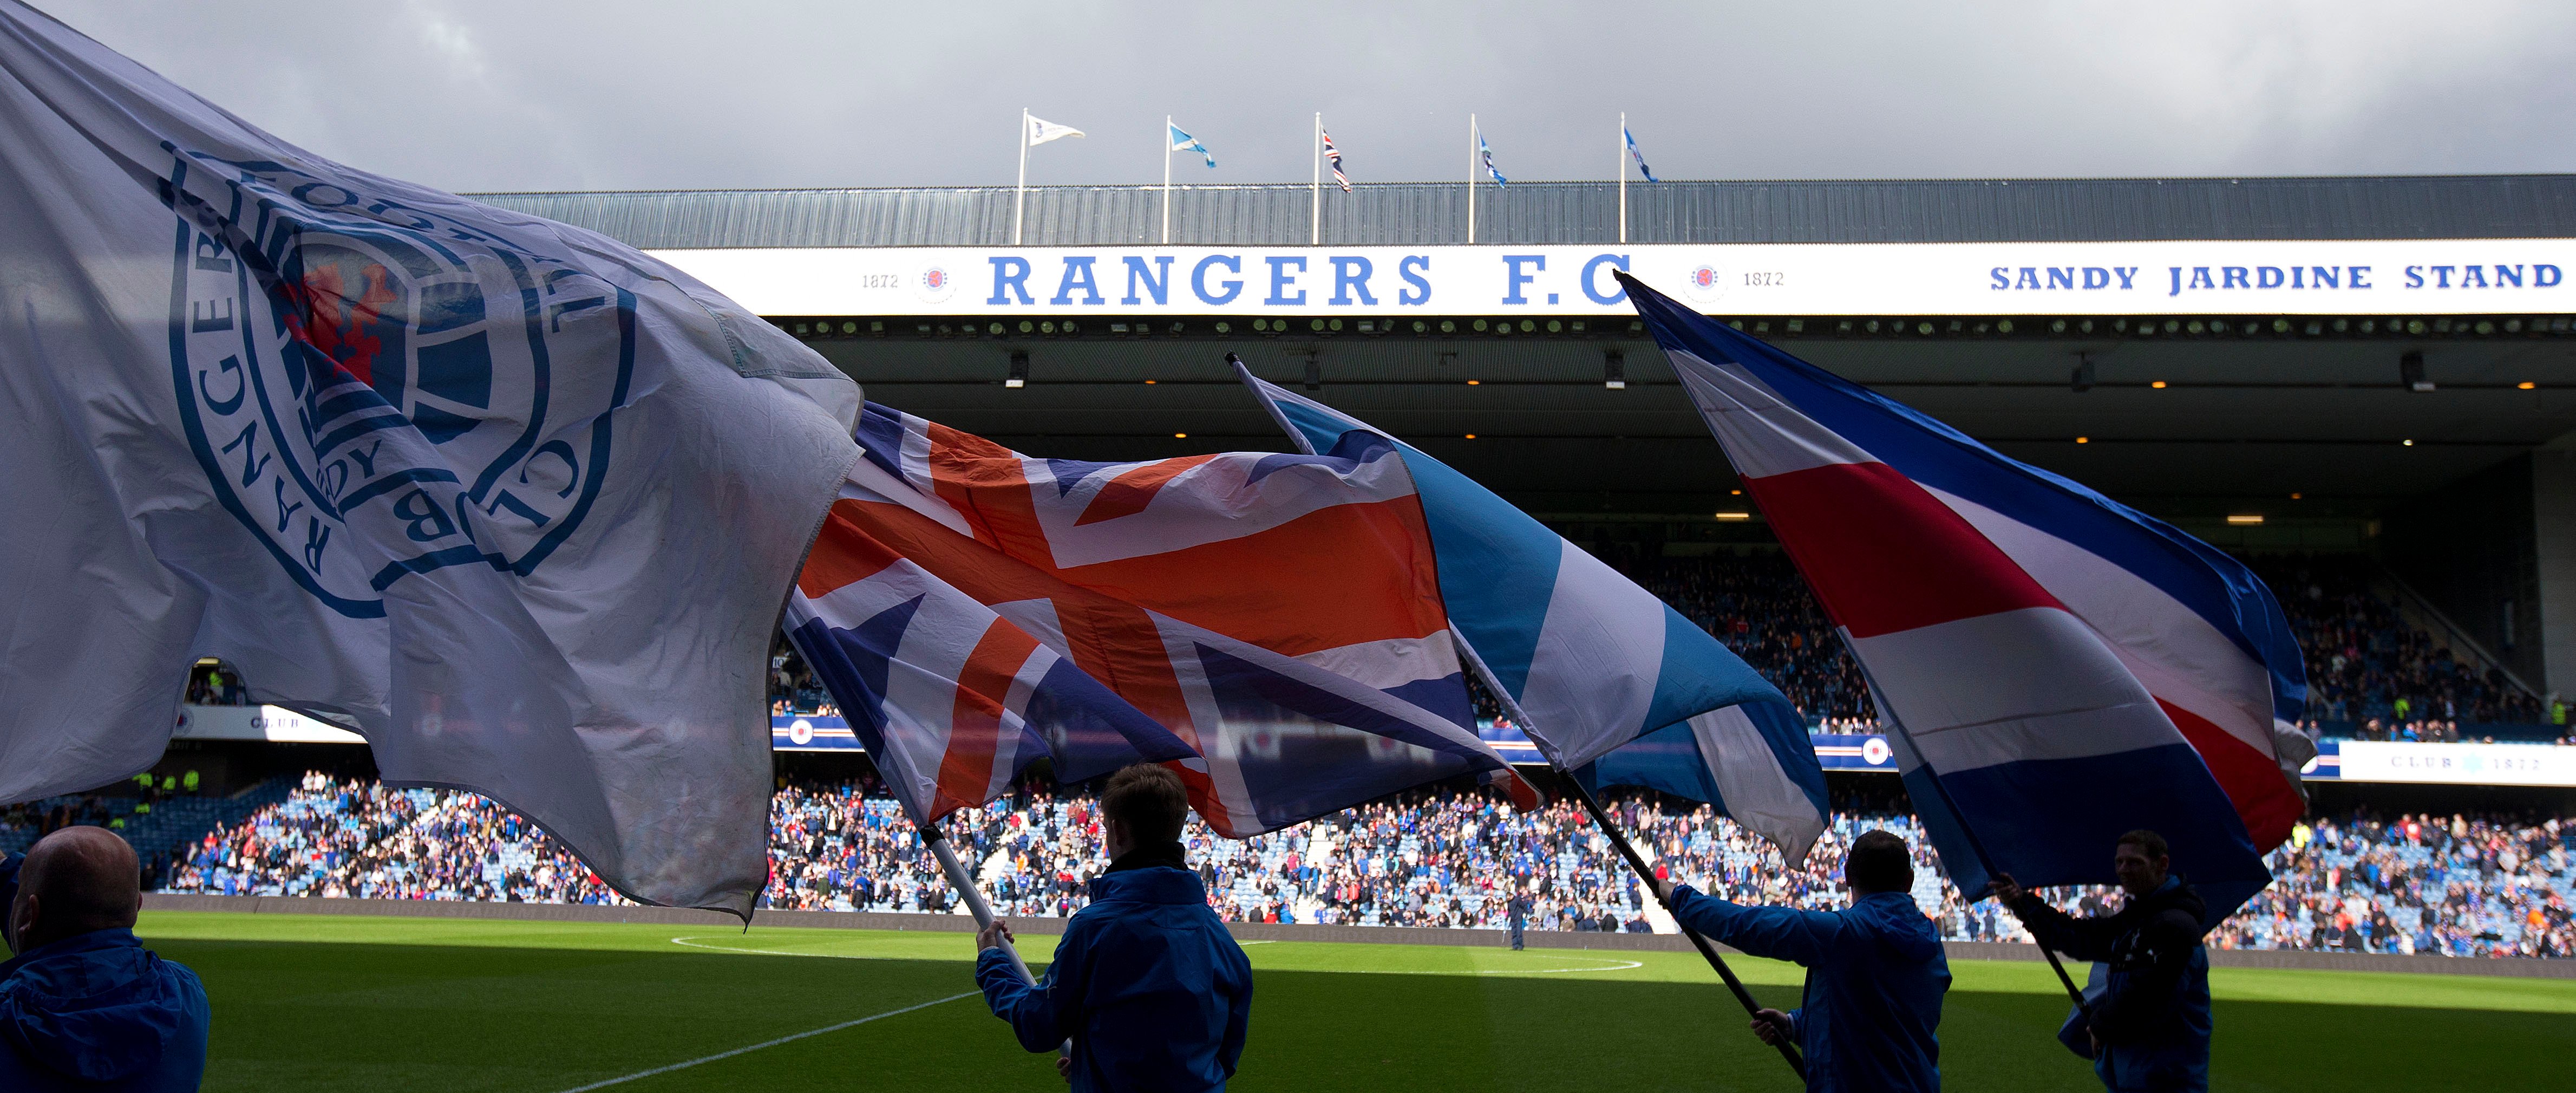 Gers Commercial Opportunities Rangers Football Club, Official Website